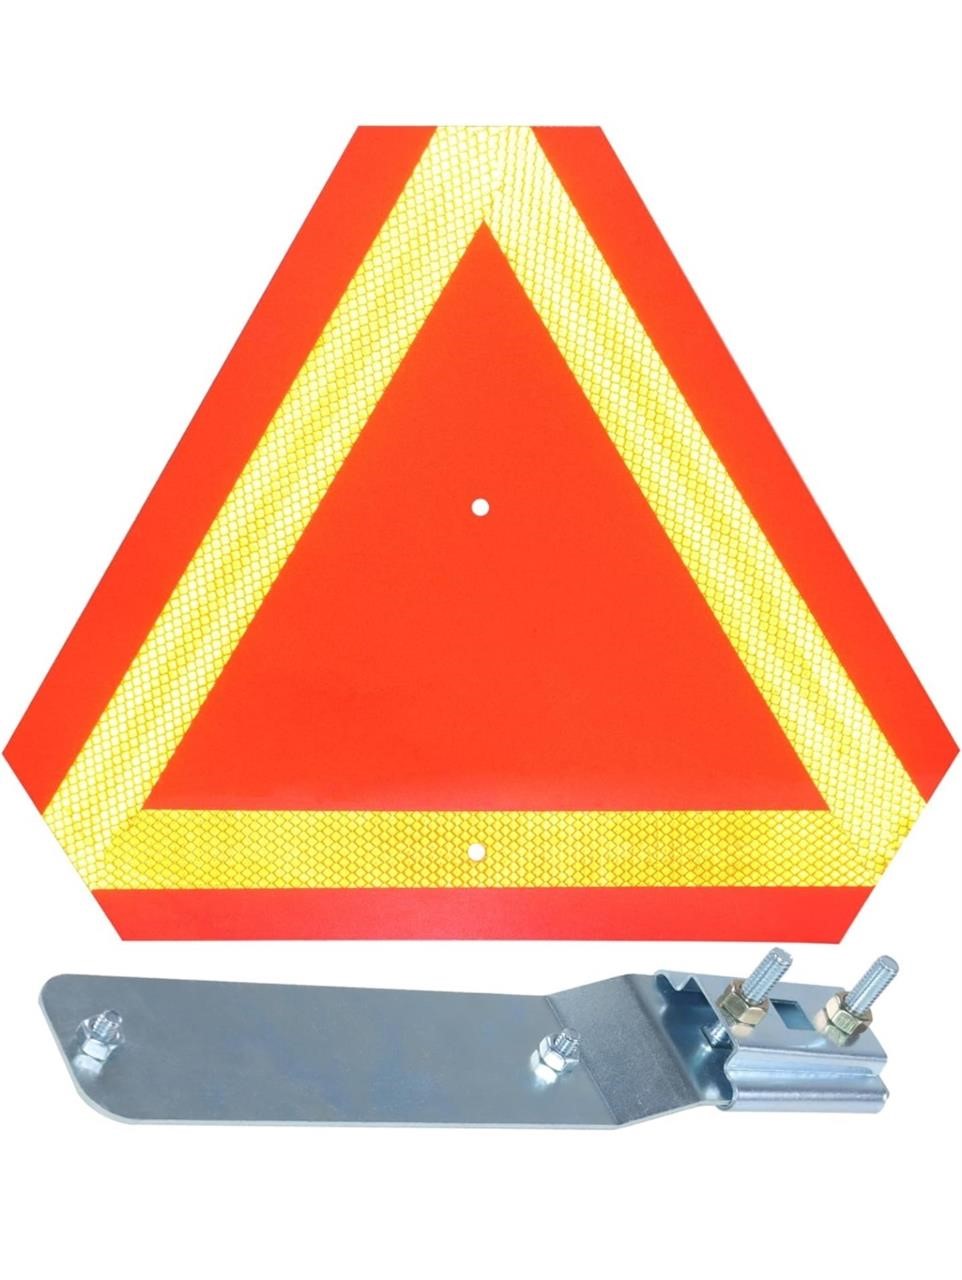 Slow Moving Vehicle Mounting Bracket With sign